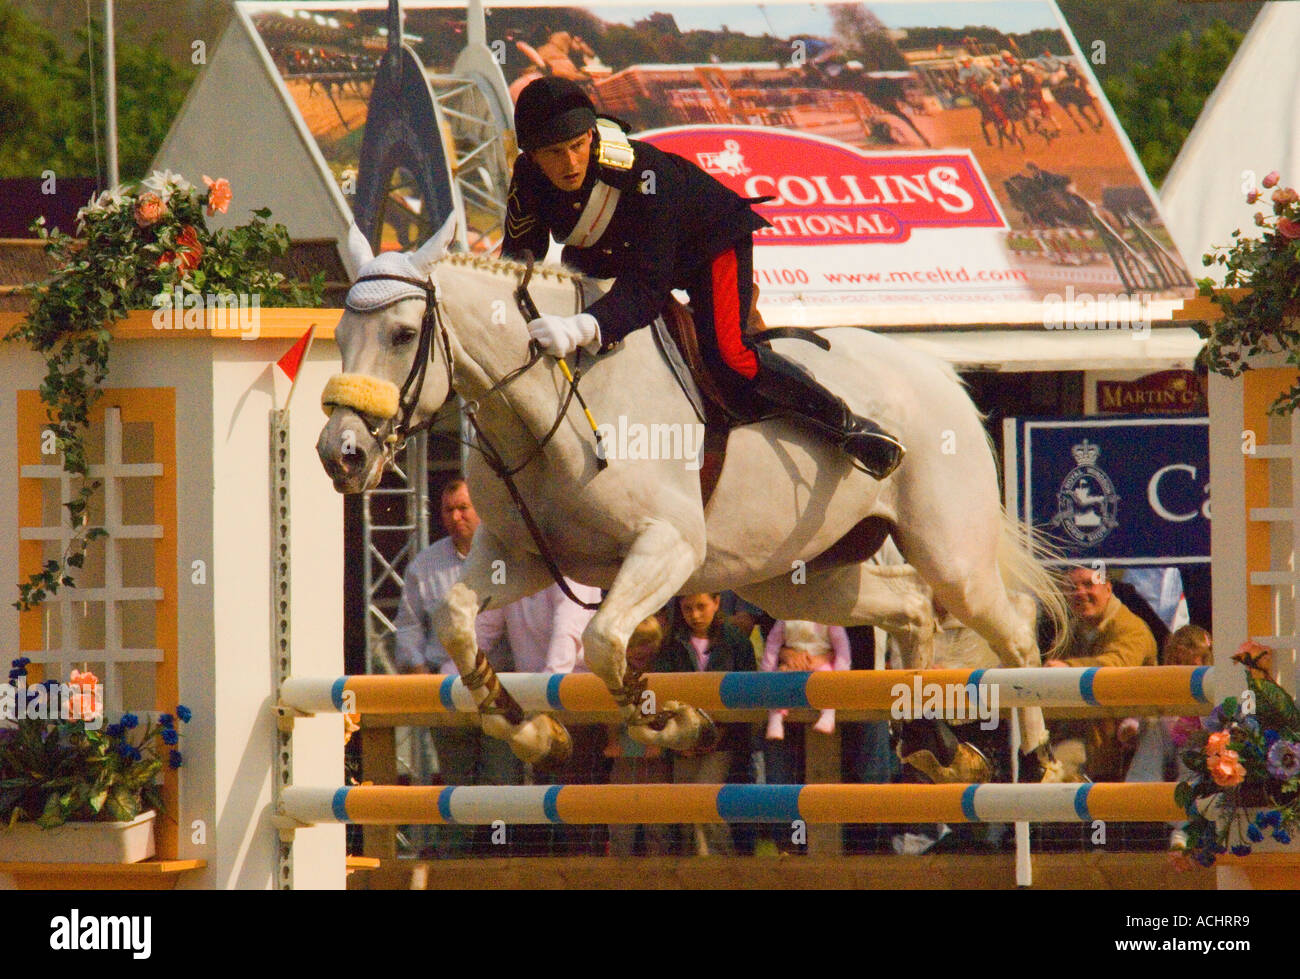 White horseclearing an obstacle at show jumping competition Royal Windsor Horse Show 2006 Stock Photo